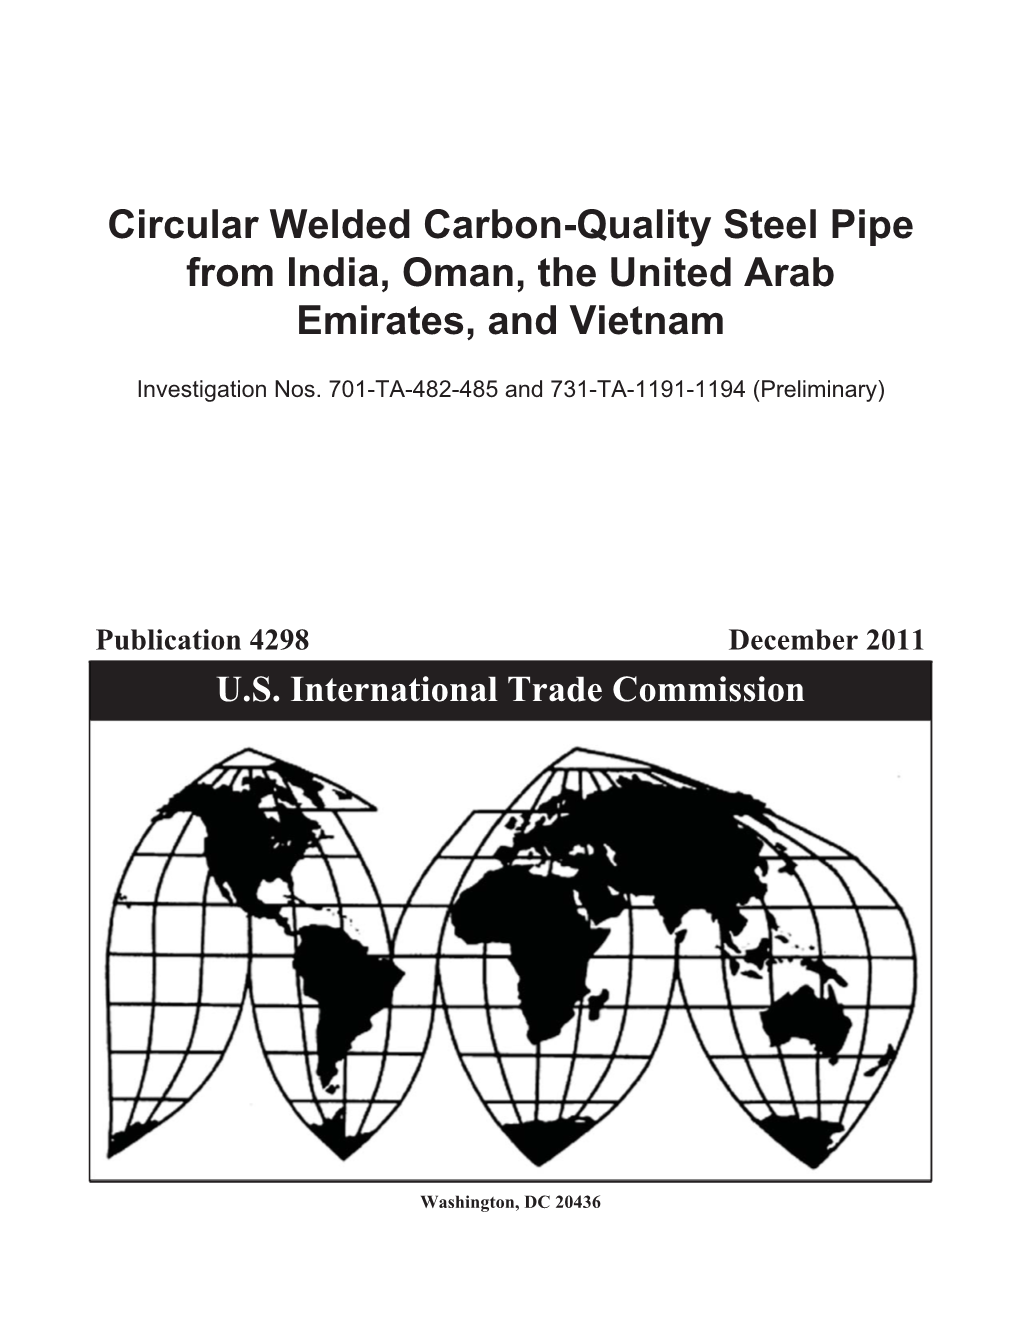 Circular Welded Carbon-Quality Steel Pipe from India, Oman, the United Arab Emirates, and Vietnam